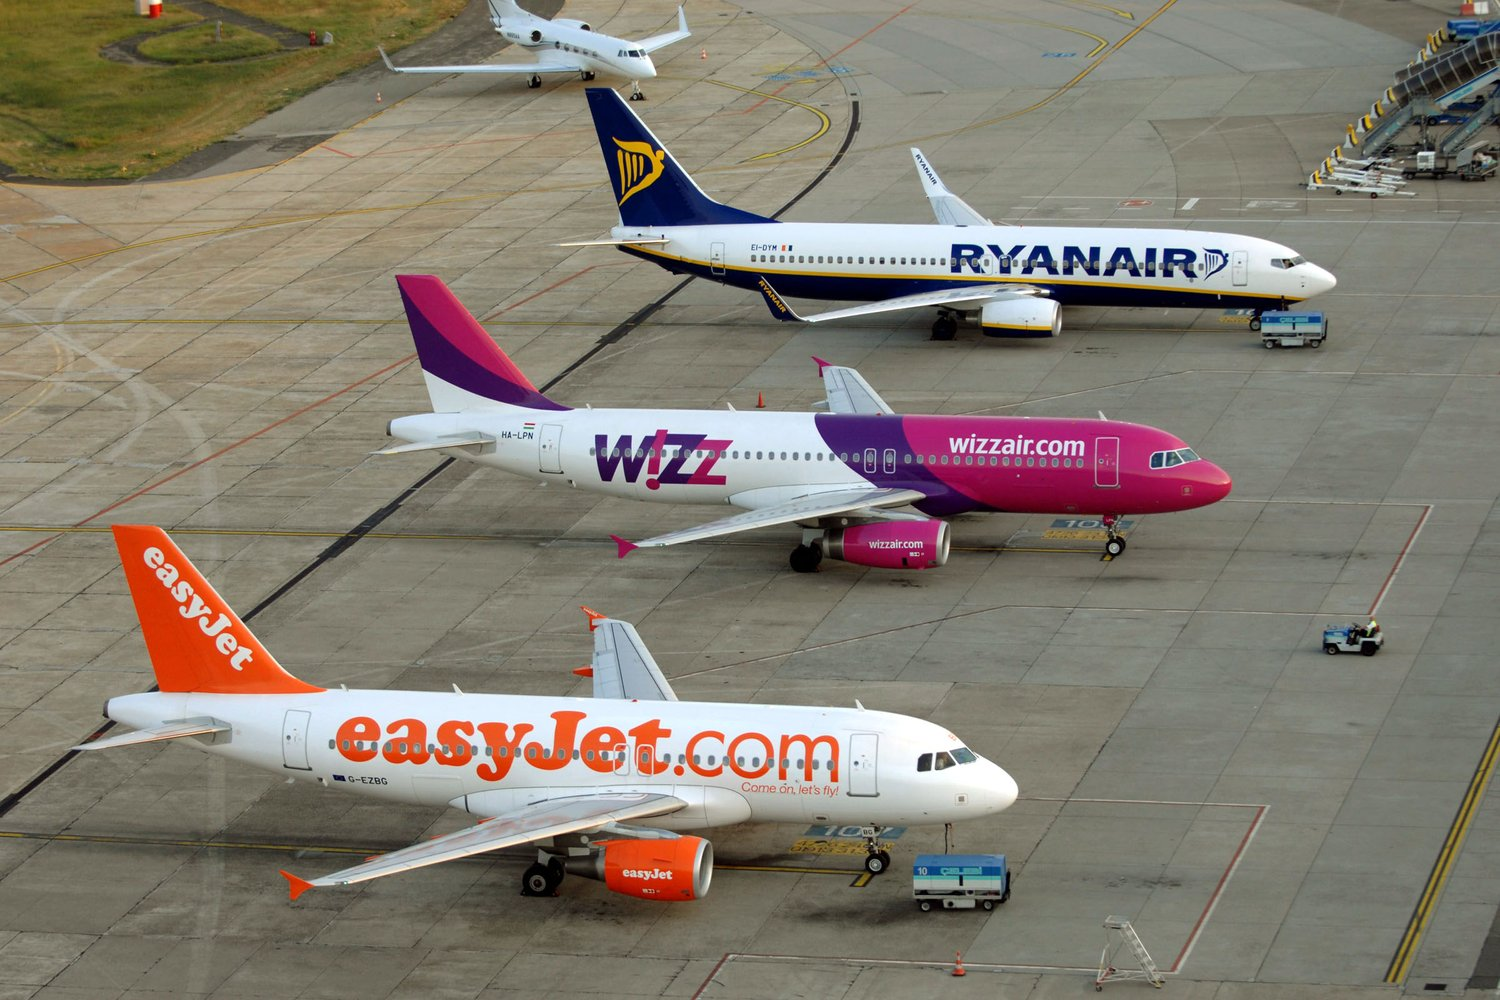 EasyJet, WizzAir and Ryanair narrow-body aircraft stationed at an airport.